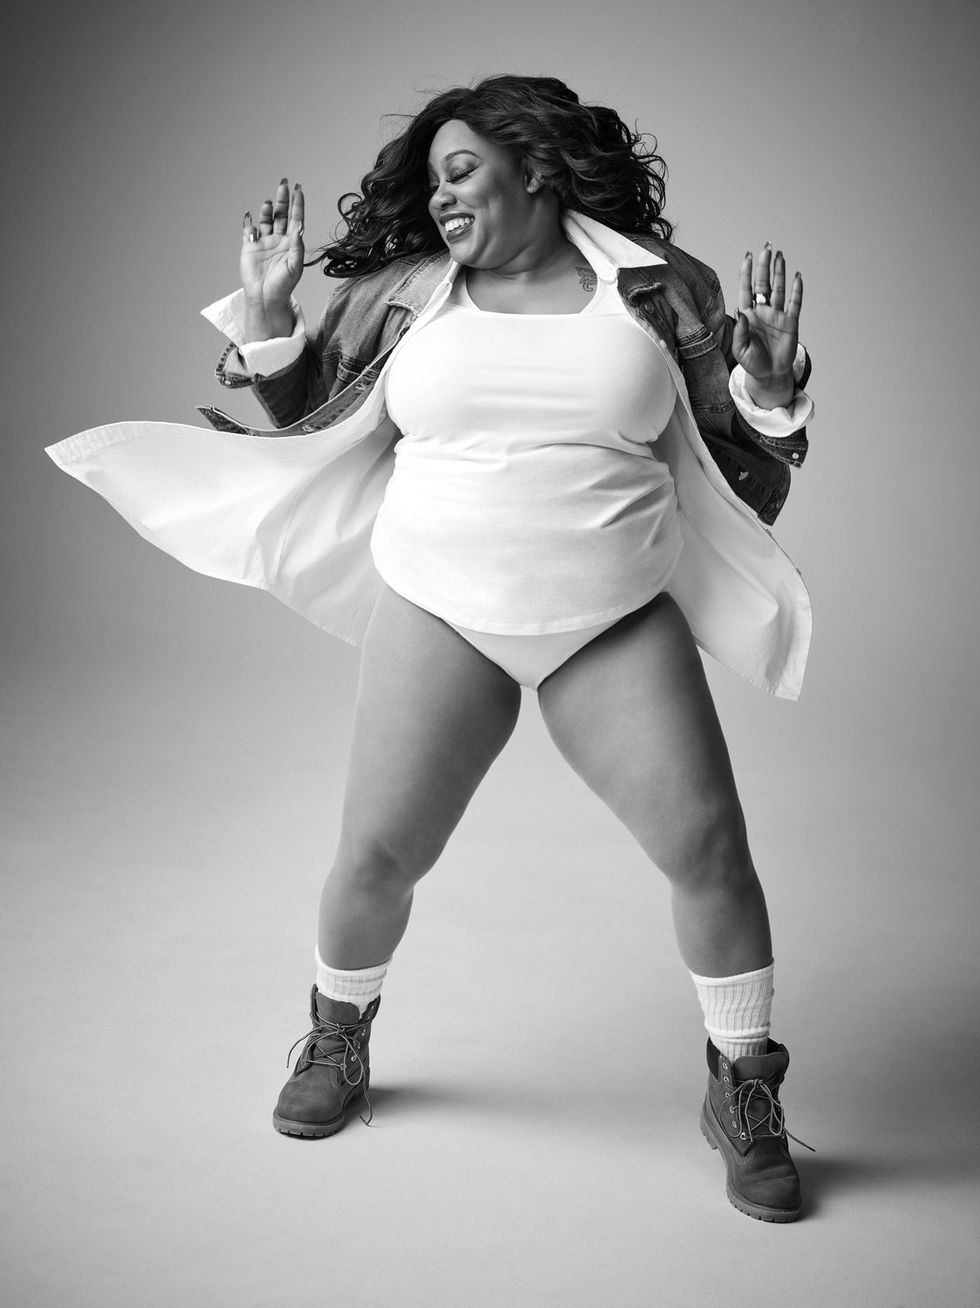 Lane Bryant to Launch 'This Body' Campaign